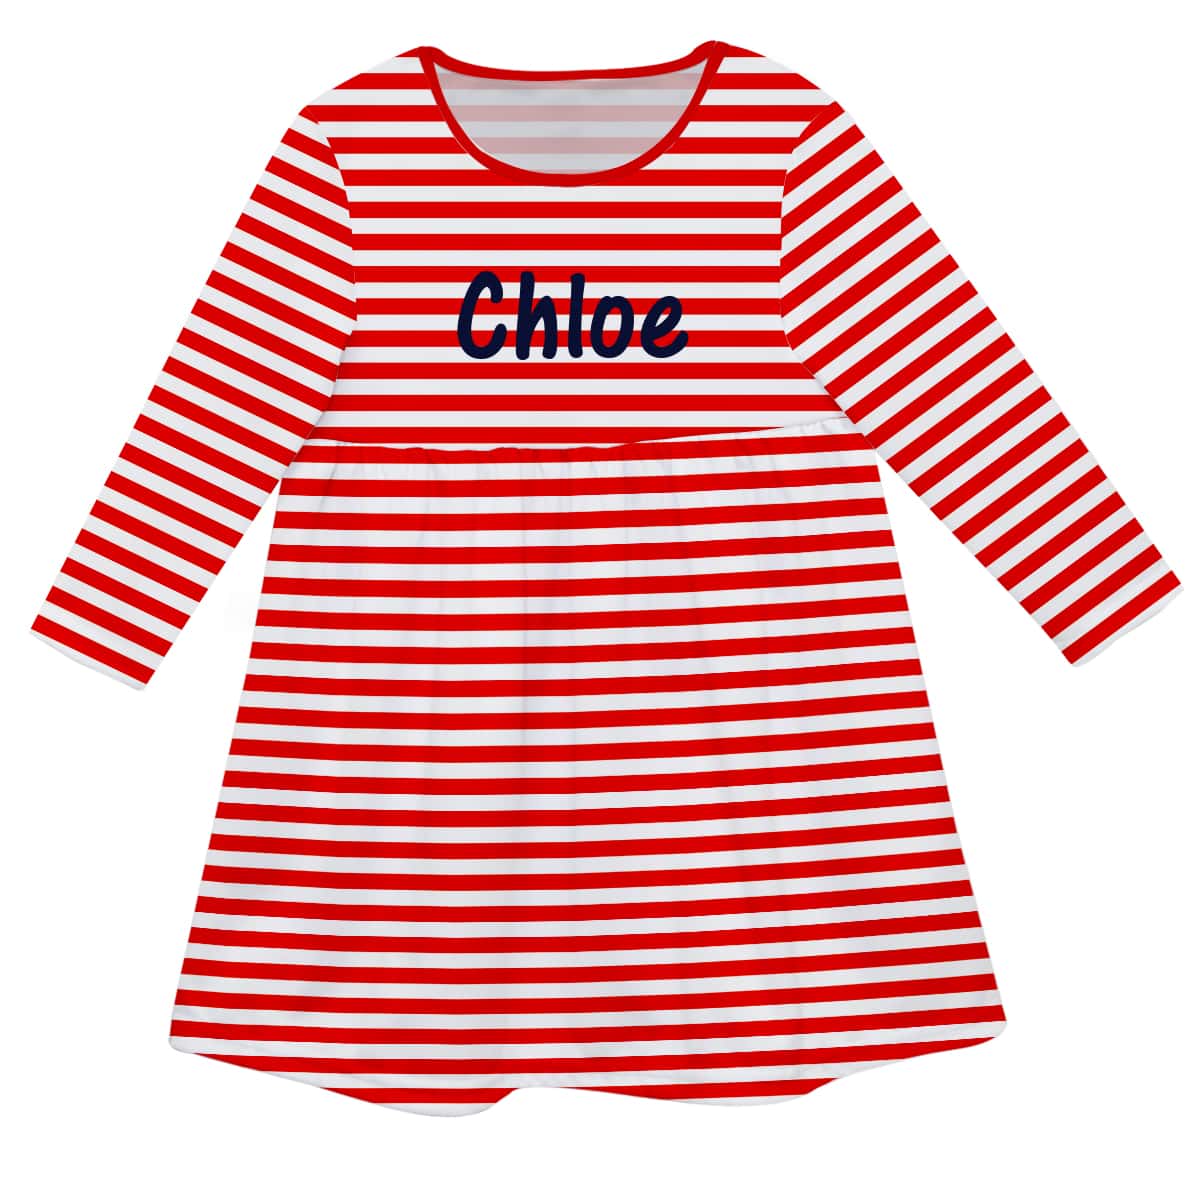 Girls red and white candy canes dress with name - Wimziy&Co.